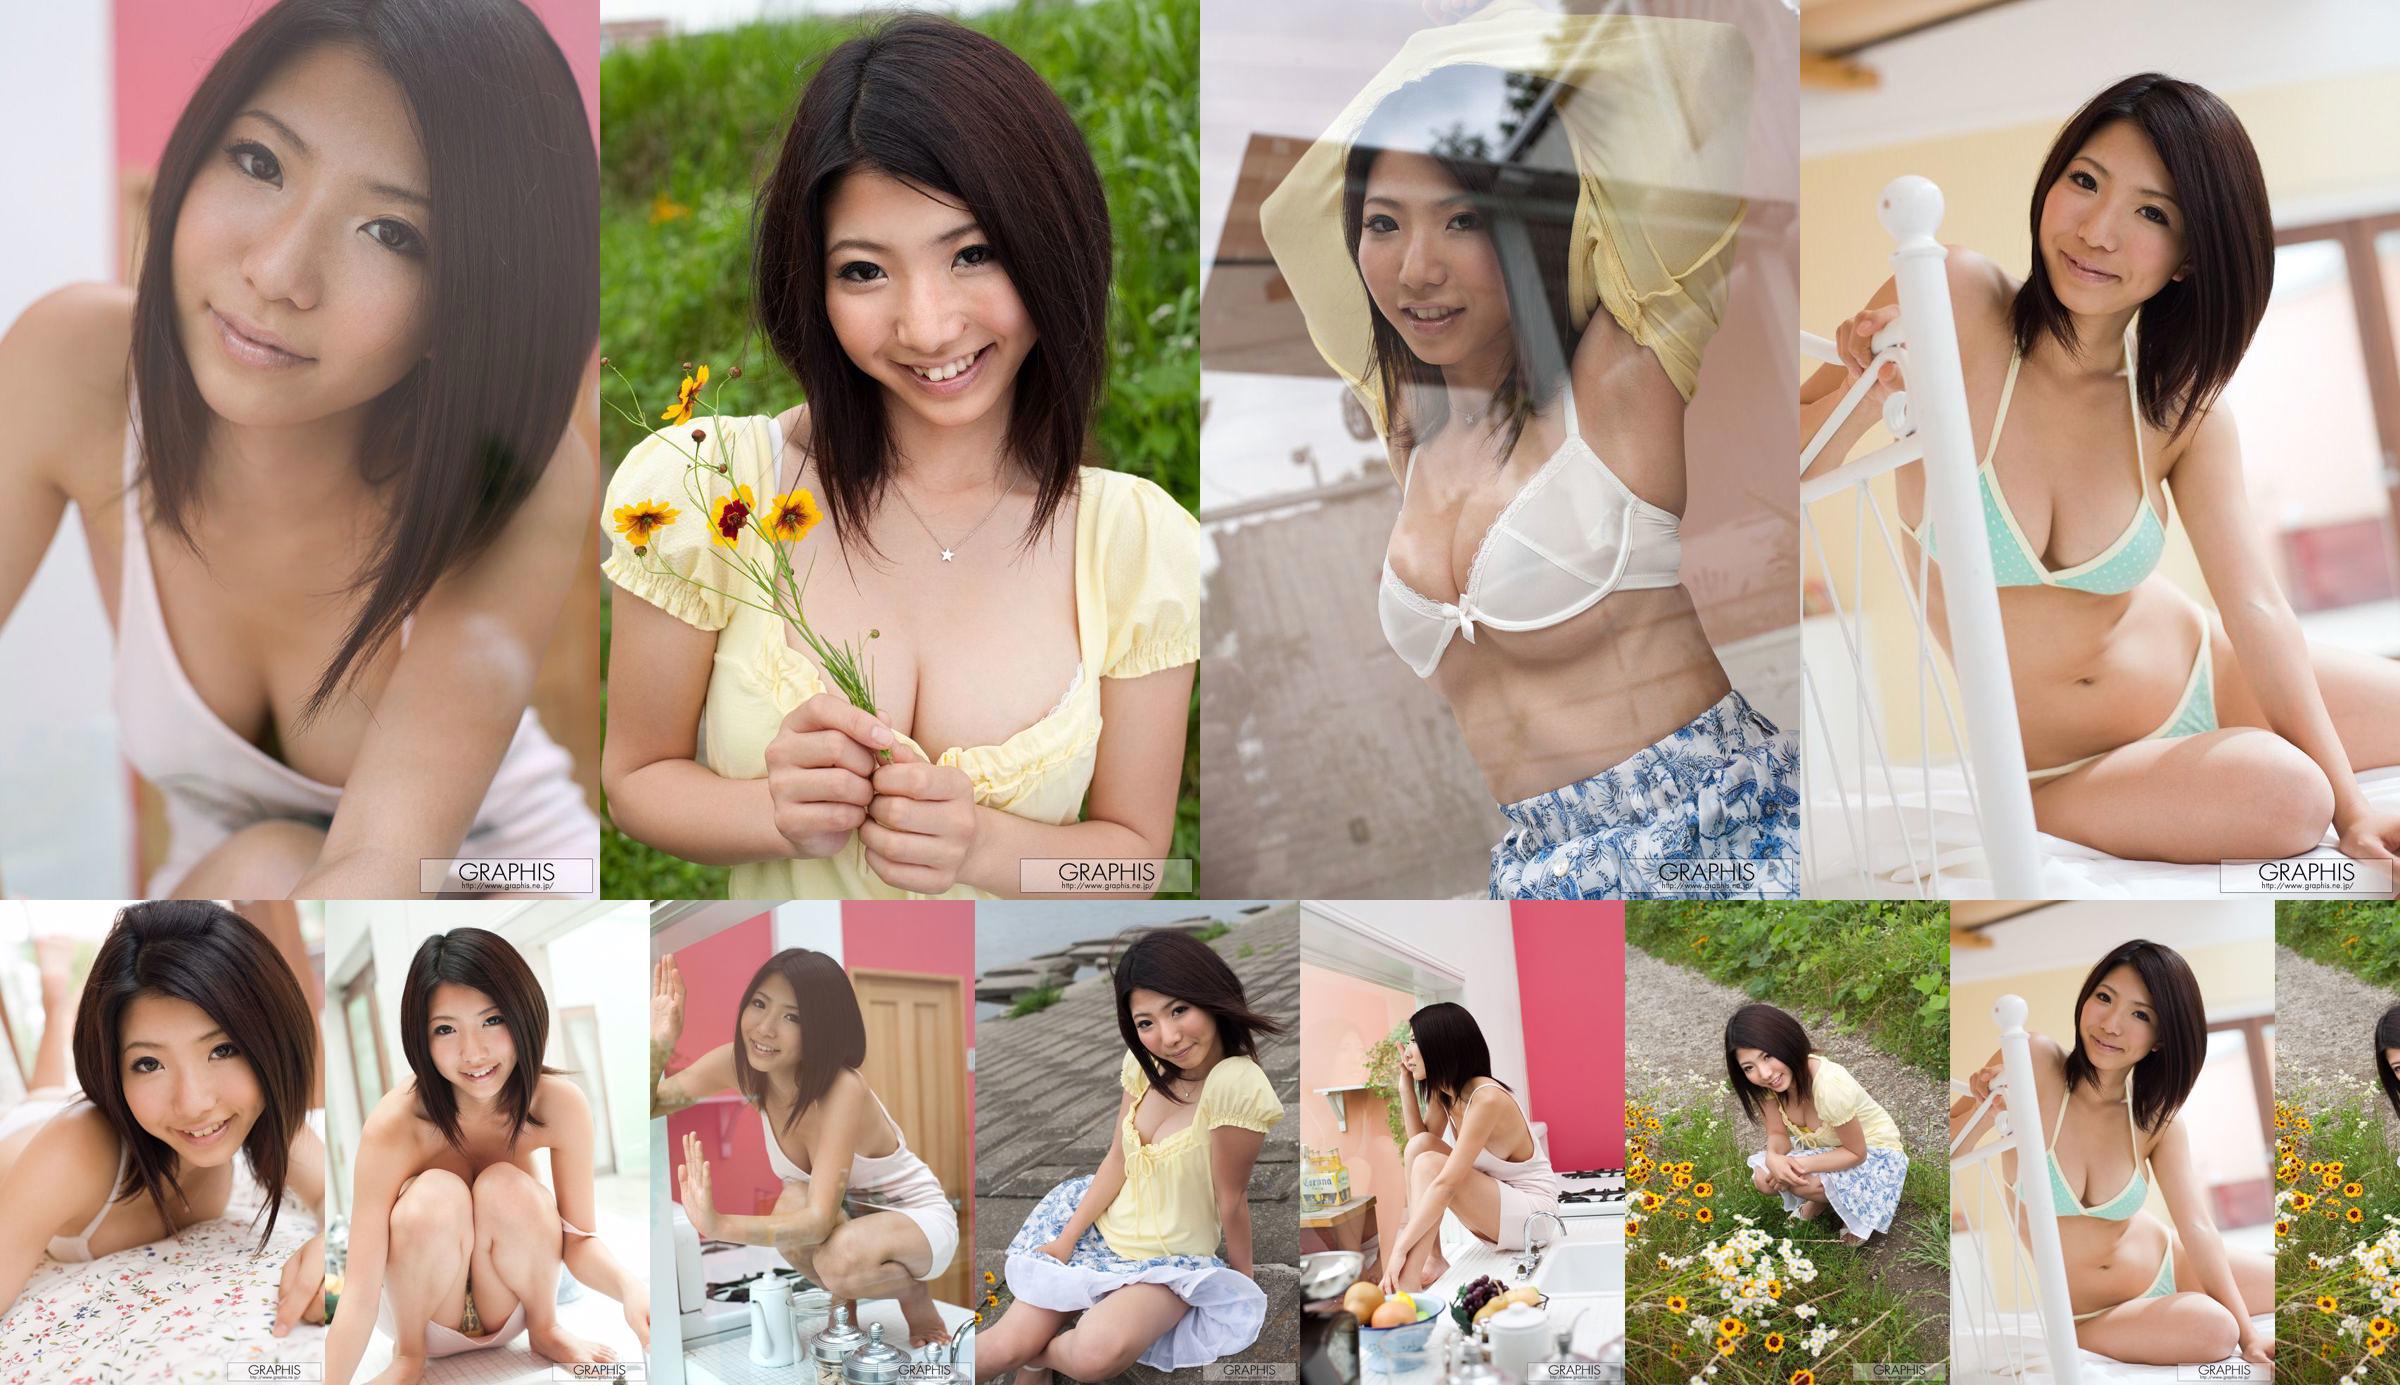 An Ann 《Simple and Innocent》 [Graphis] Gals No.3734d1 Seite 1